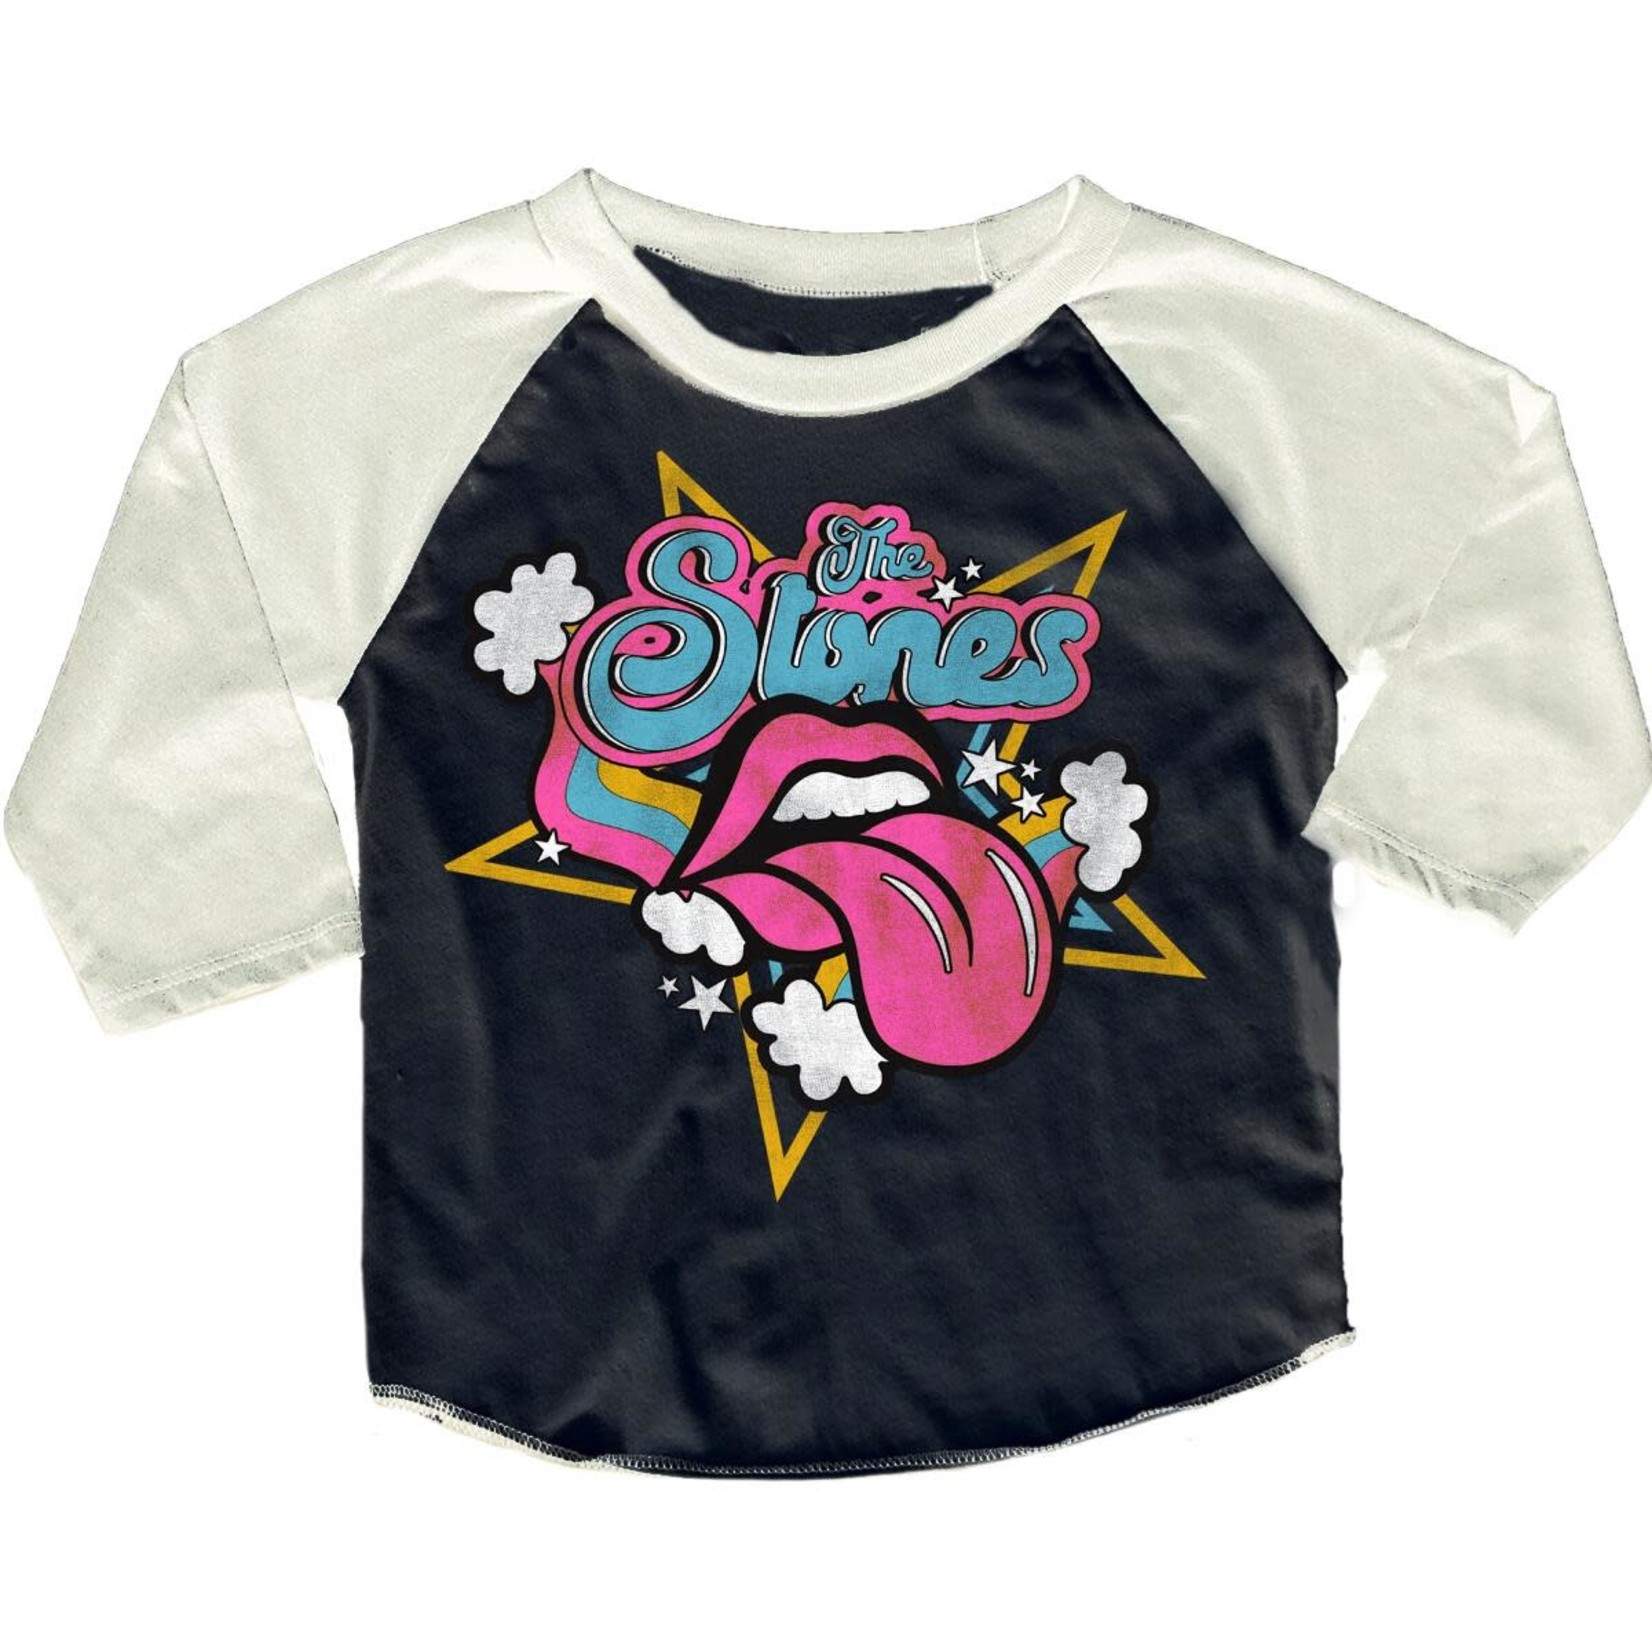 Rowdy Spout Rowdy Sprout Off Black/Cream Rolling Stones Raglan Tee